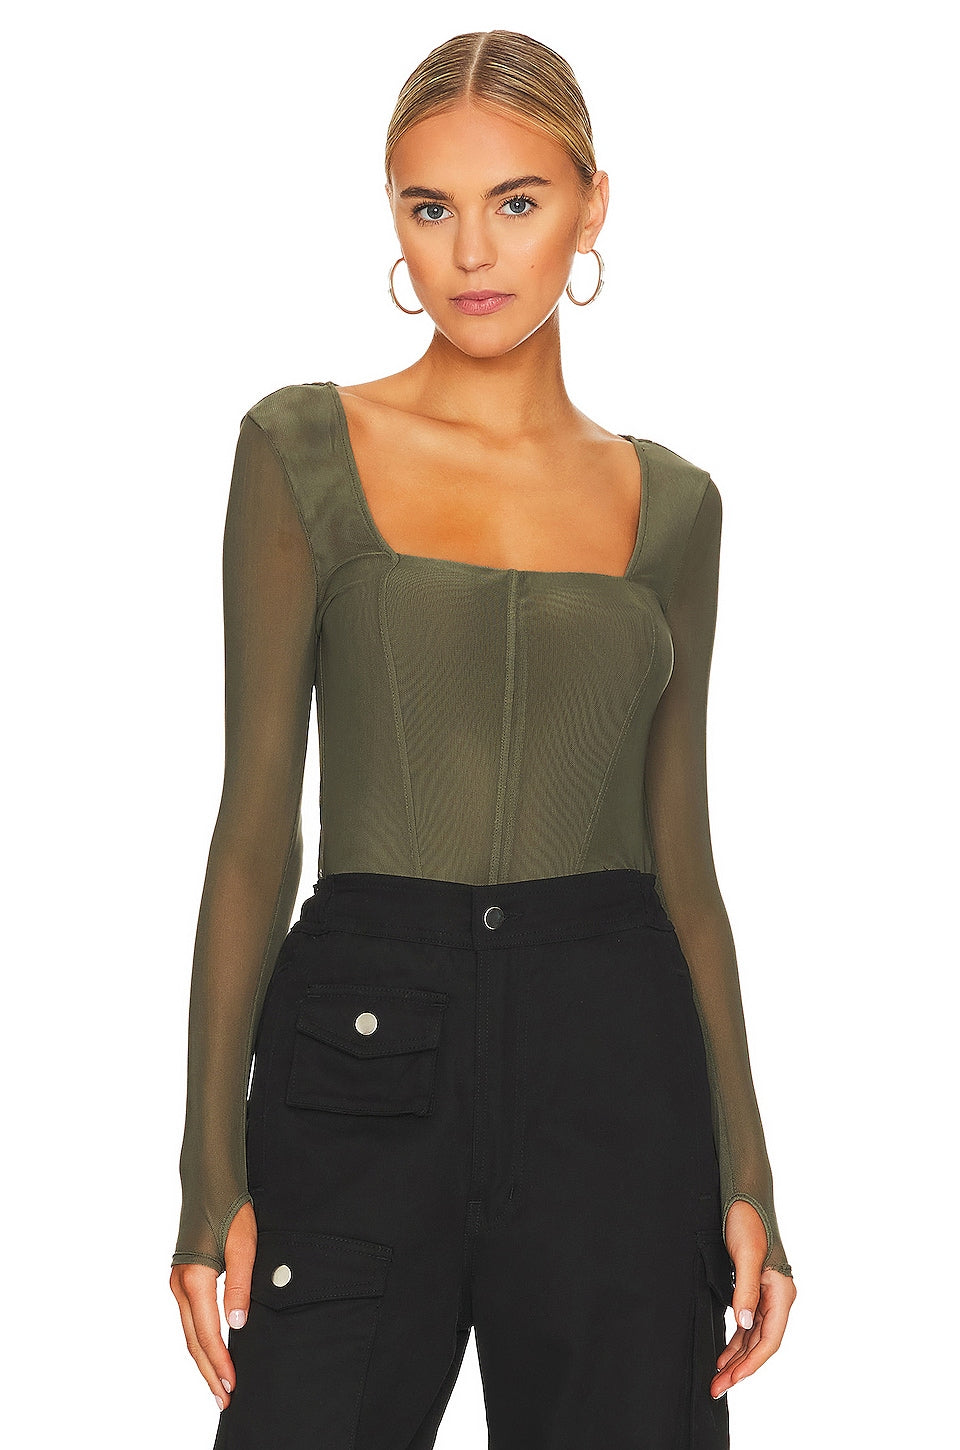 Steve Madden Hayden Top in Olive Night Size Small